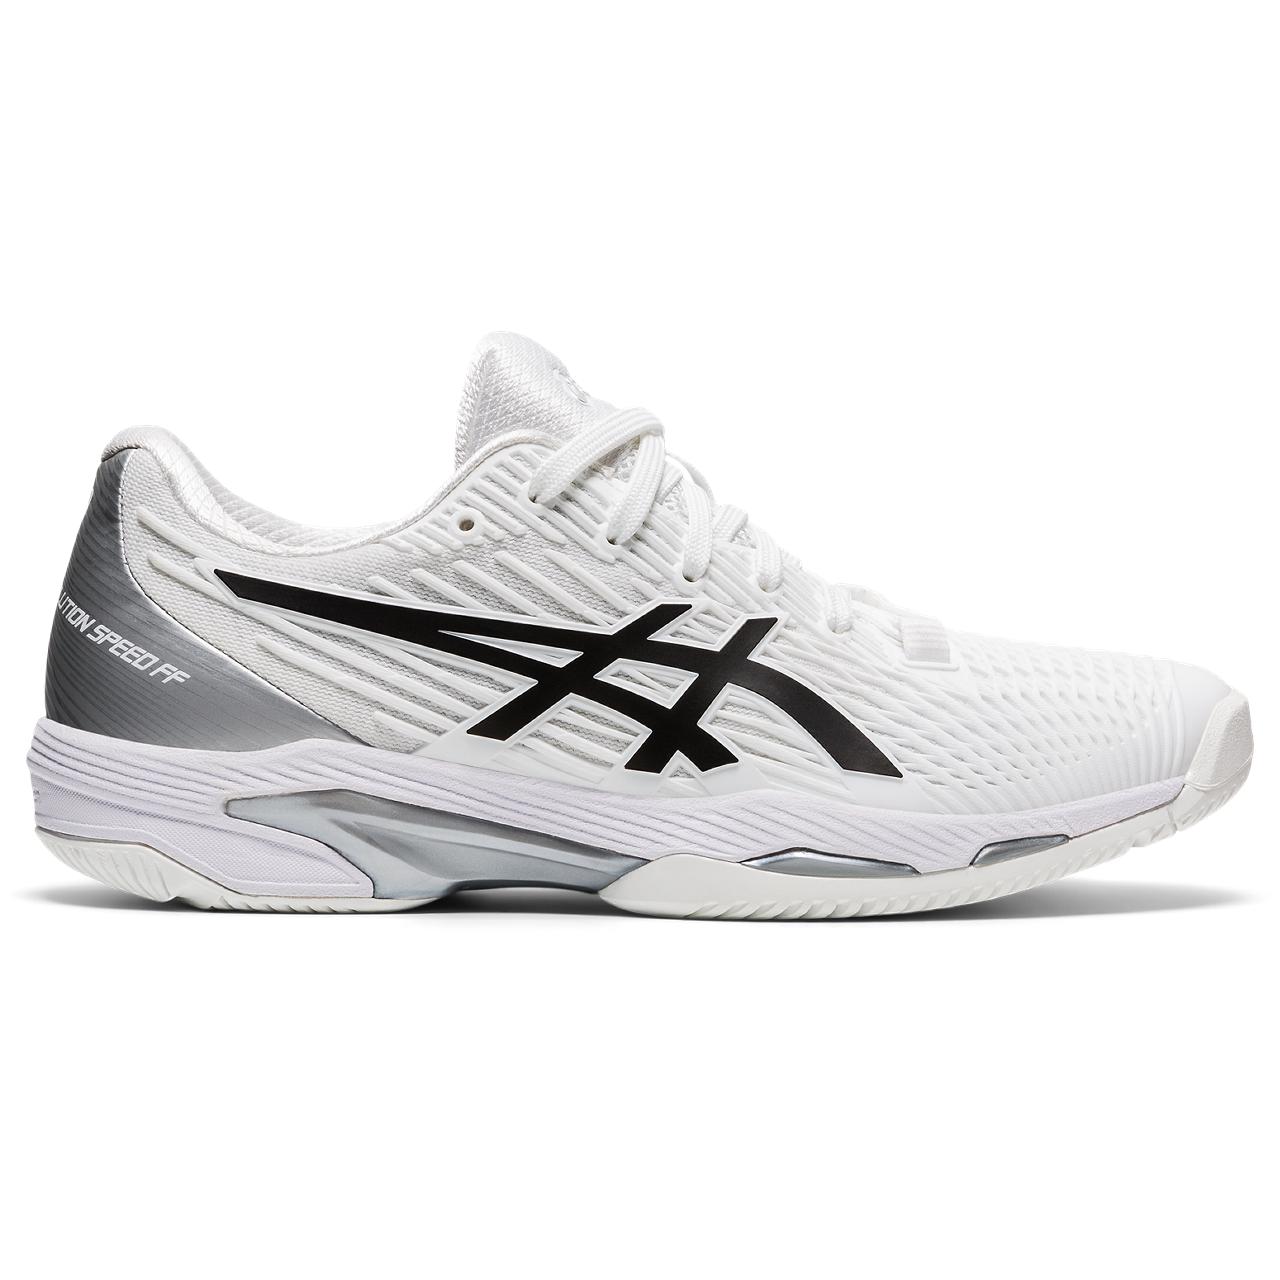 When you're playing a high-impact sport like tennis, you need technically advanced footwear that's going to protect your feet and knees. The Women's ASICS Solution Speed FF tennis shoe boasts an unrivalled blend of style and supportive technology.